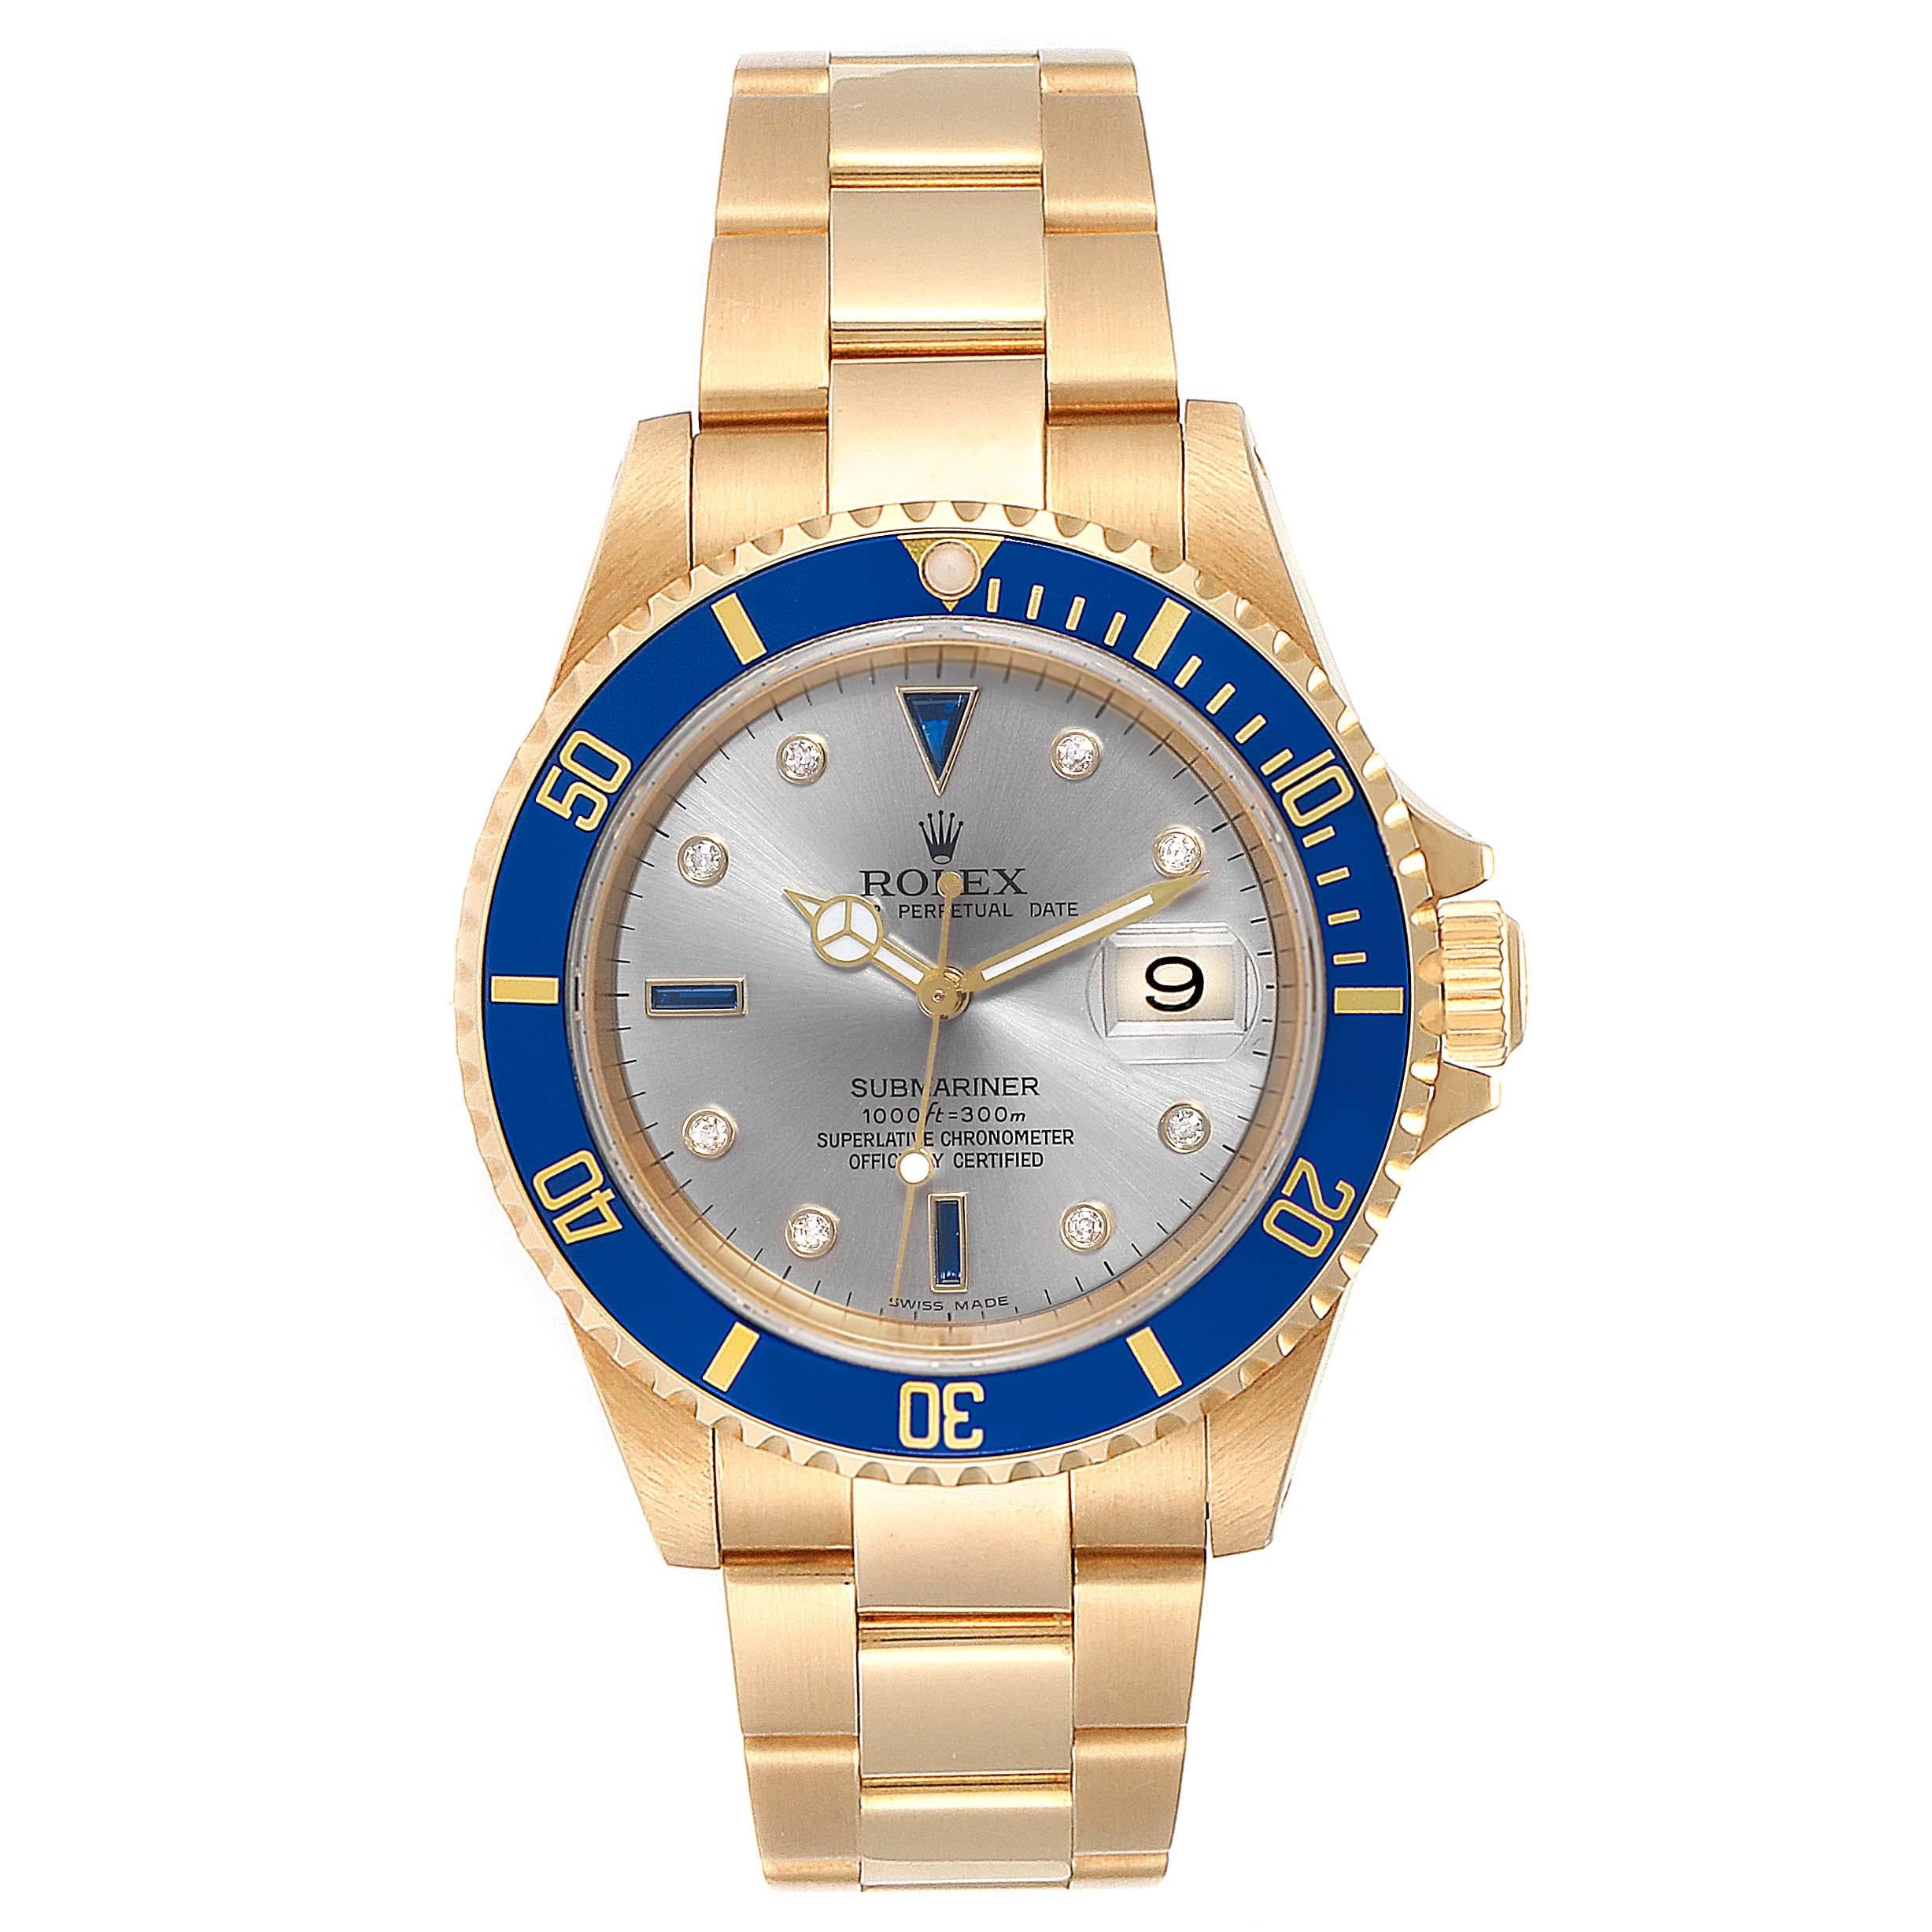 Rolex Submariner Yellow Gold Diamond Sapphire Serti Dial Watch 16618. Officially certified chronometer self-winding movement. 18k yellow gold case 40.0 mm in diameter. Rolex logo on a crown. Blue insert special time-lapse unidirectional rotating